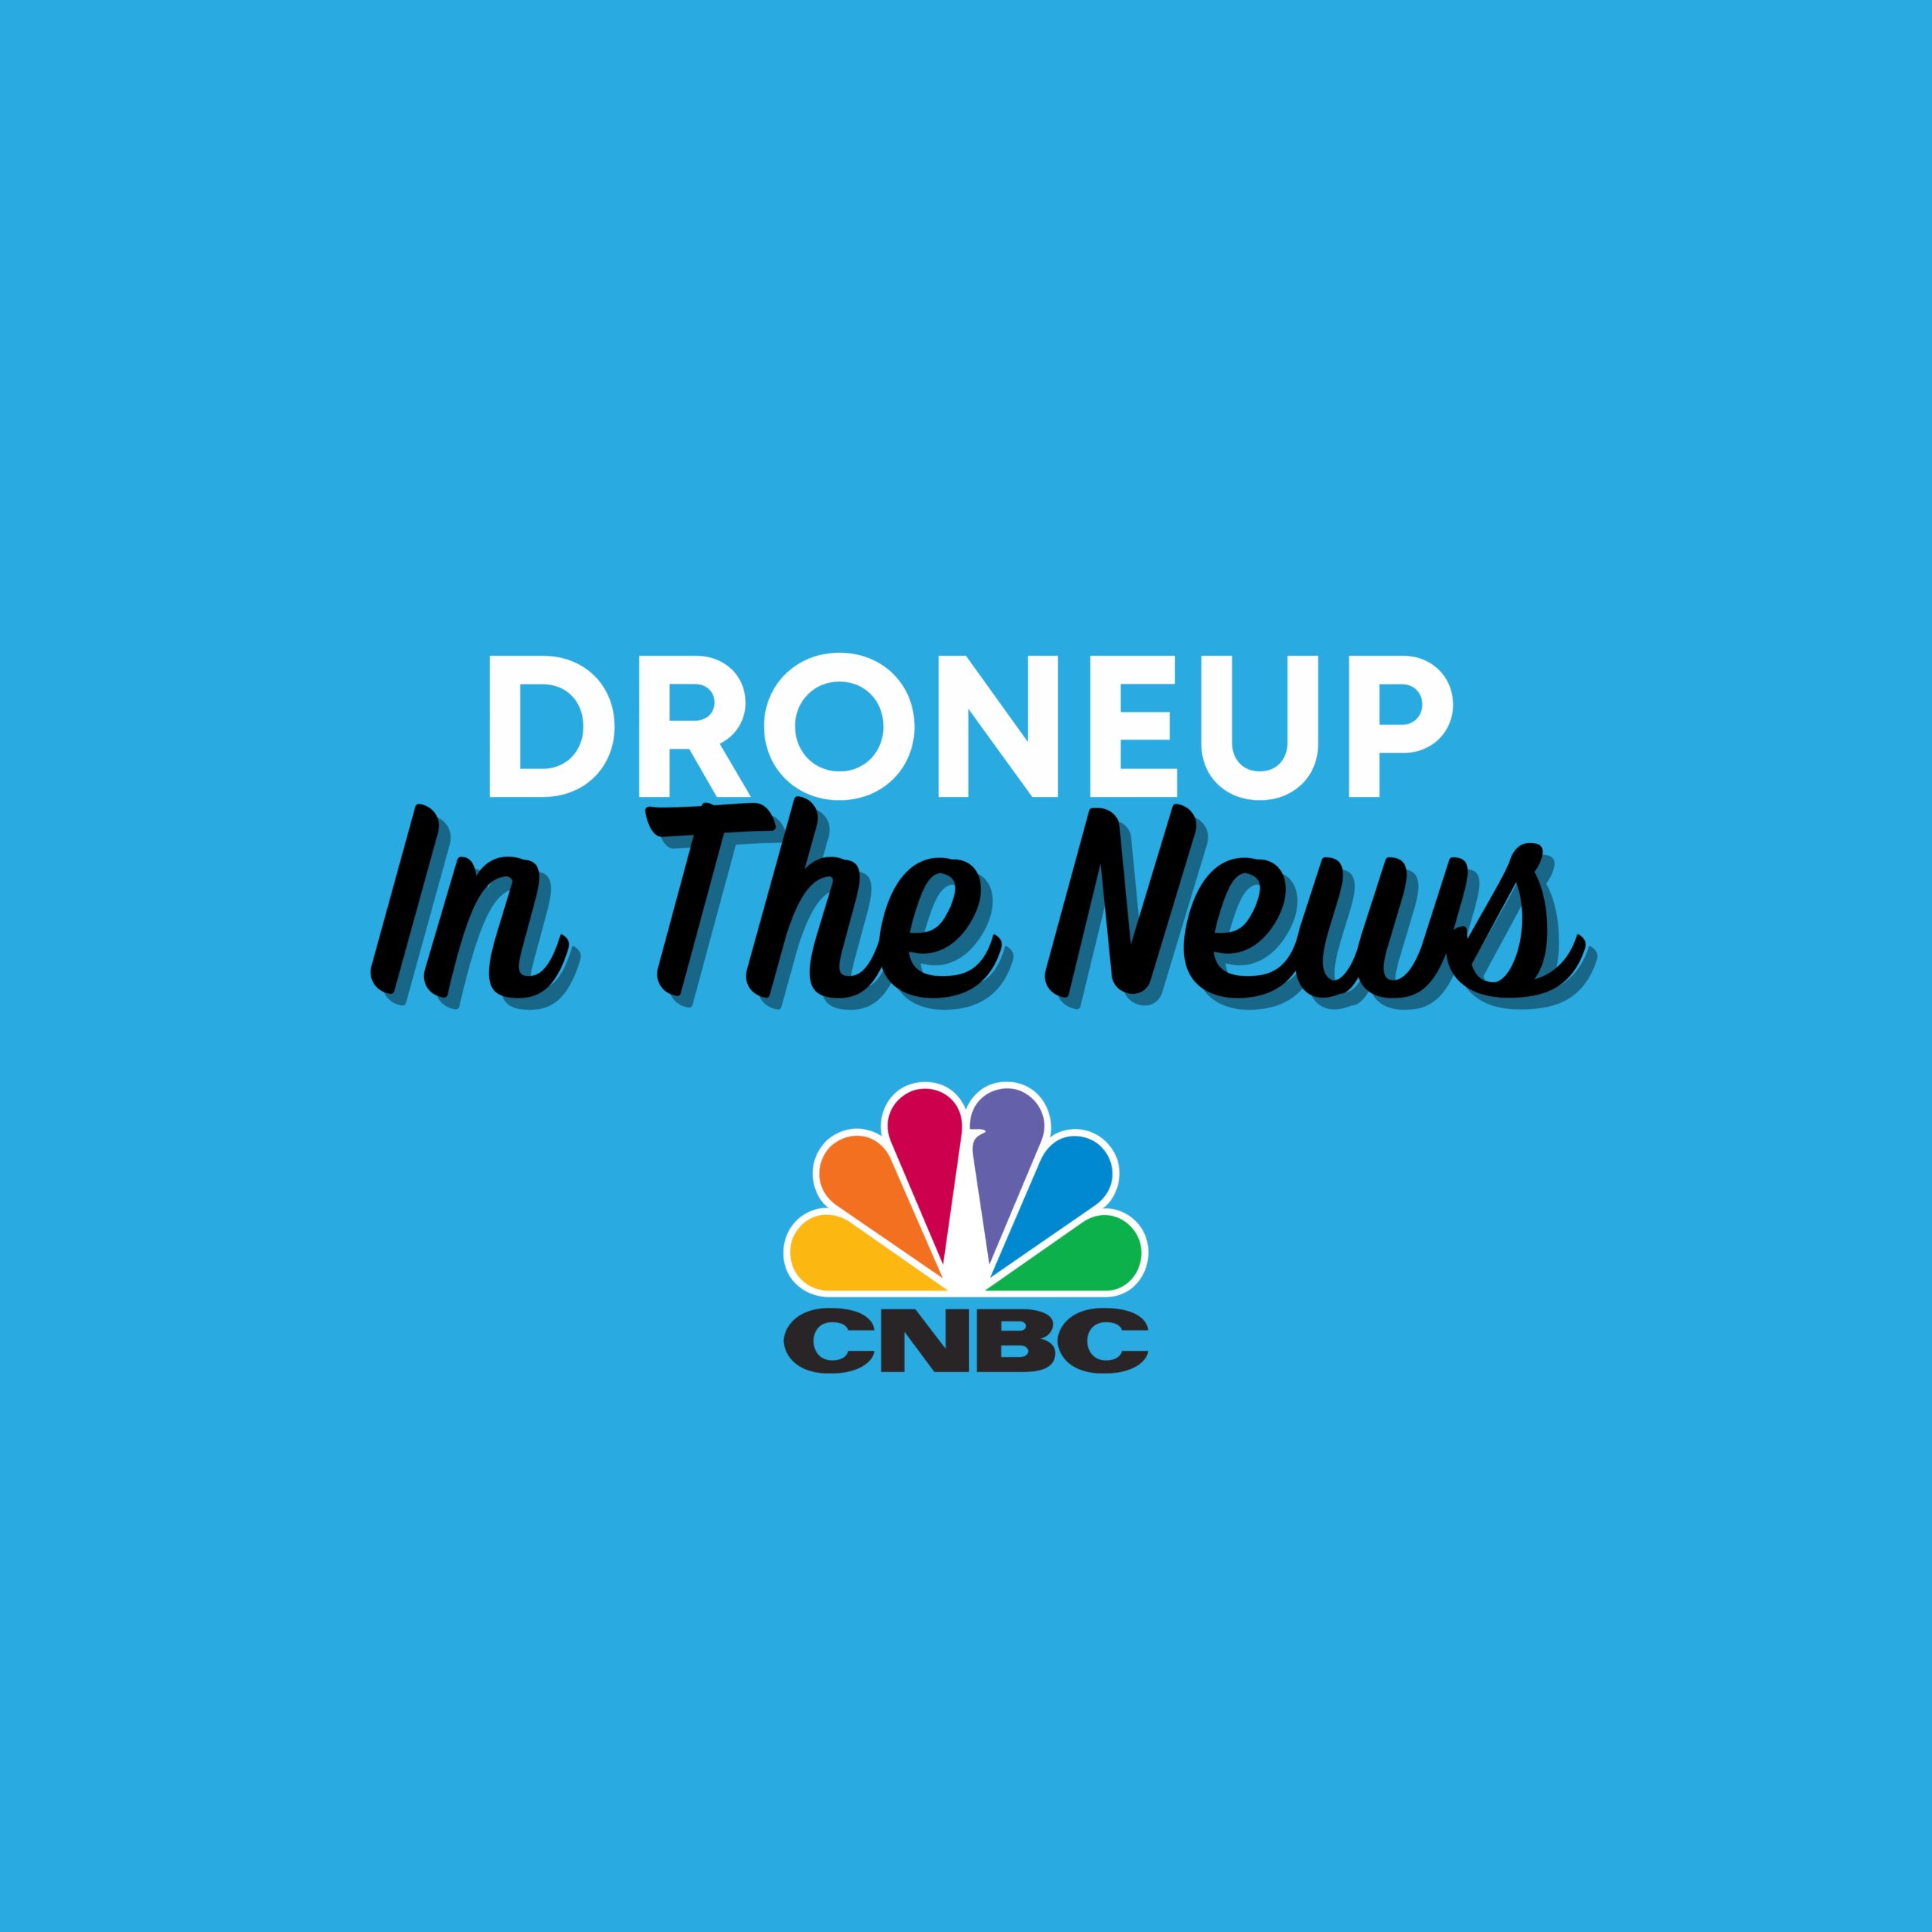 DroneUp In The News - CNBC